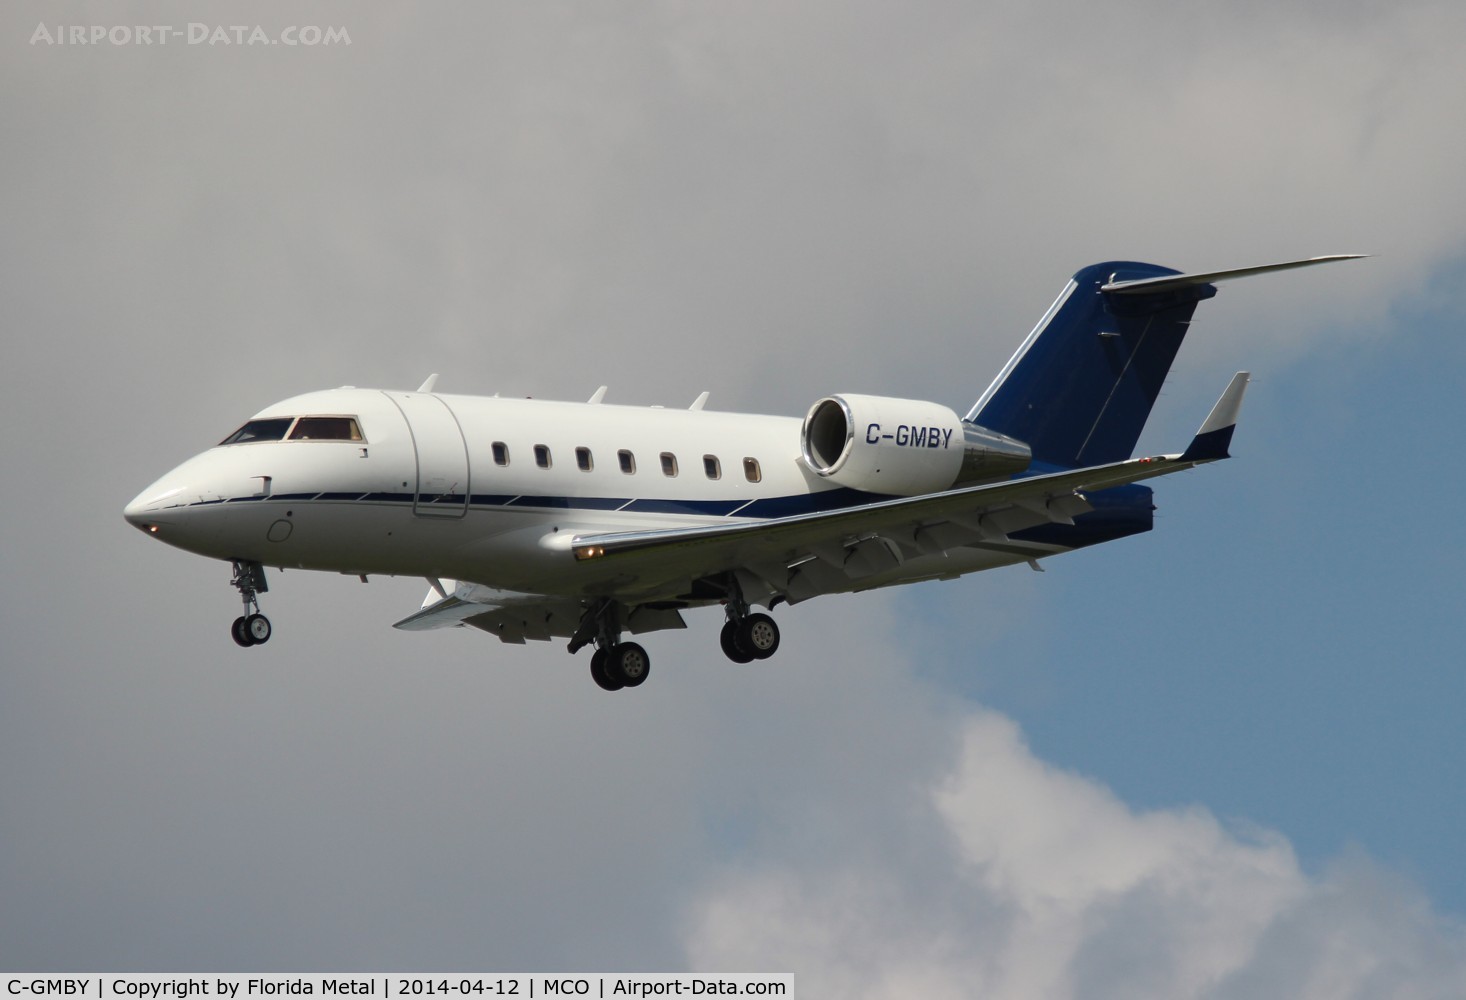 C-GMBY, 2006 Bombardier Challenger 604 (CL-600-2B16) C/N 5657, Challenger 605